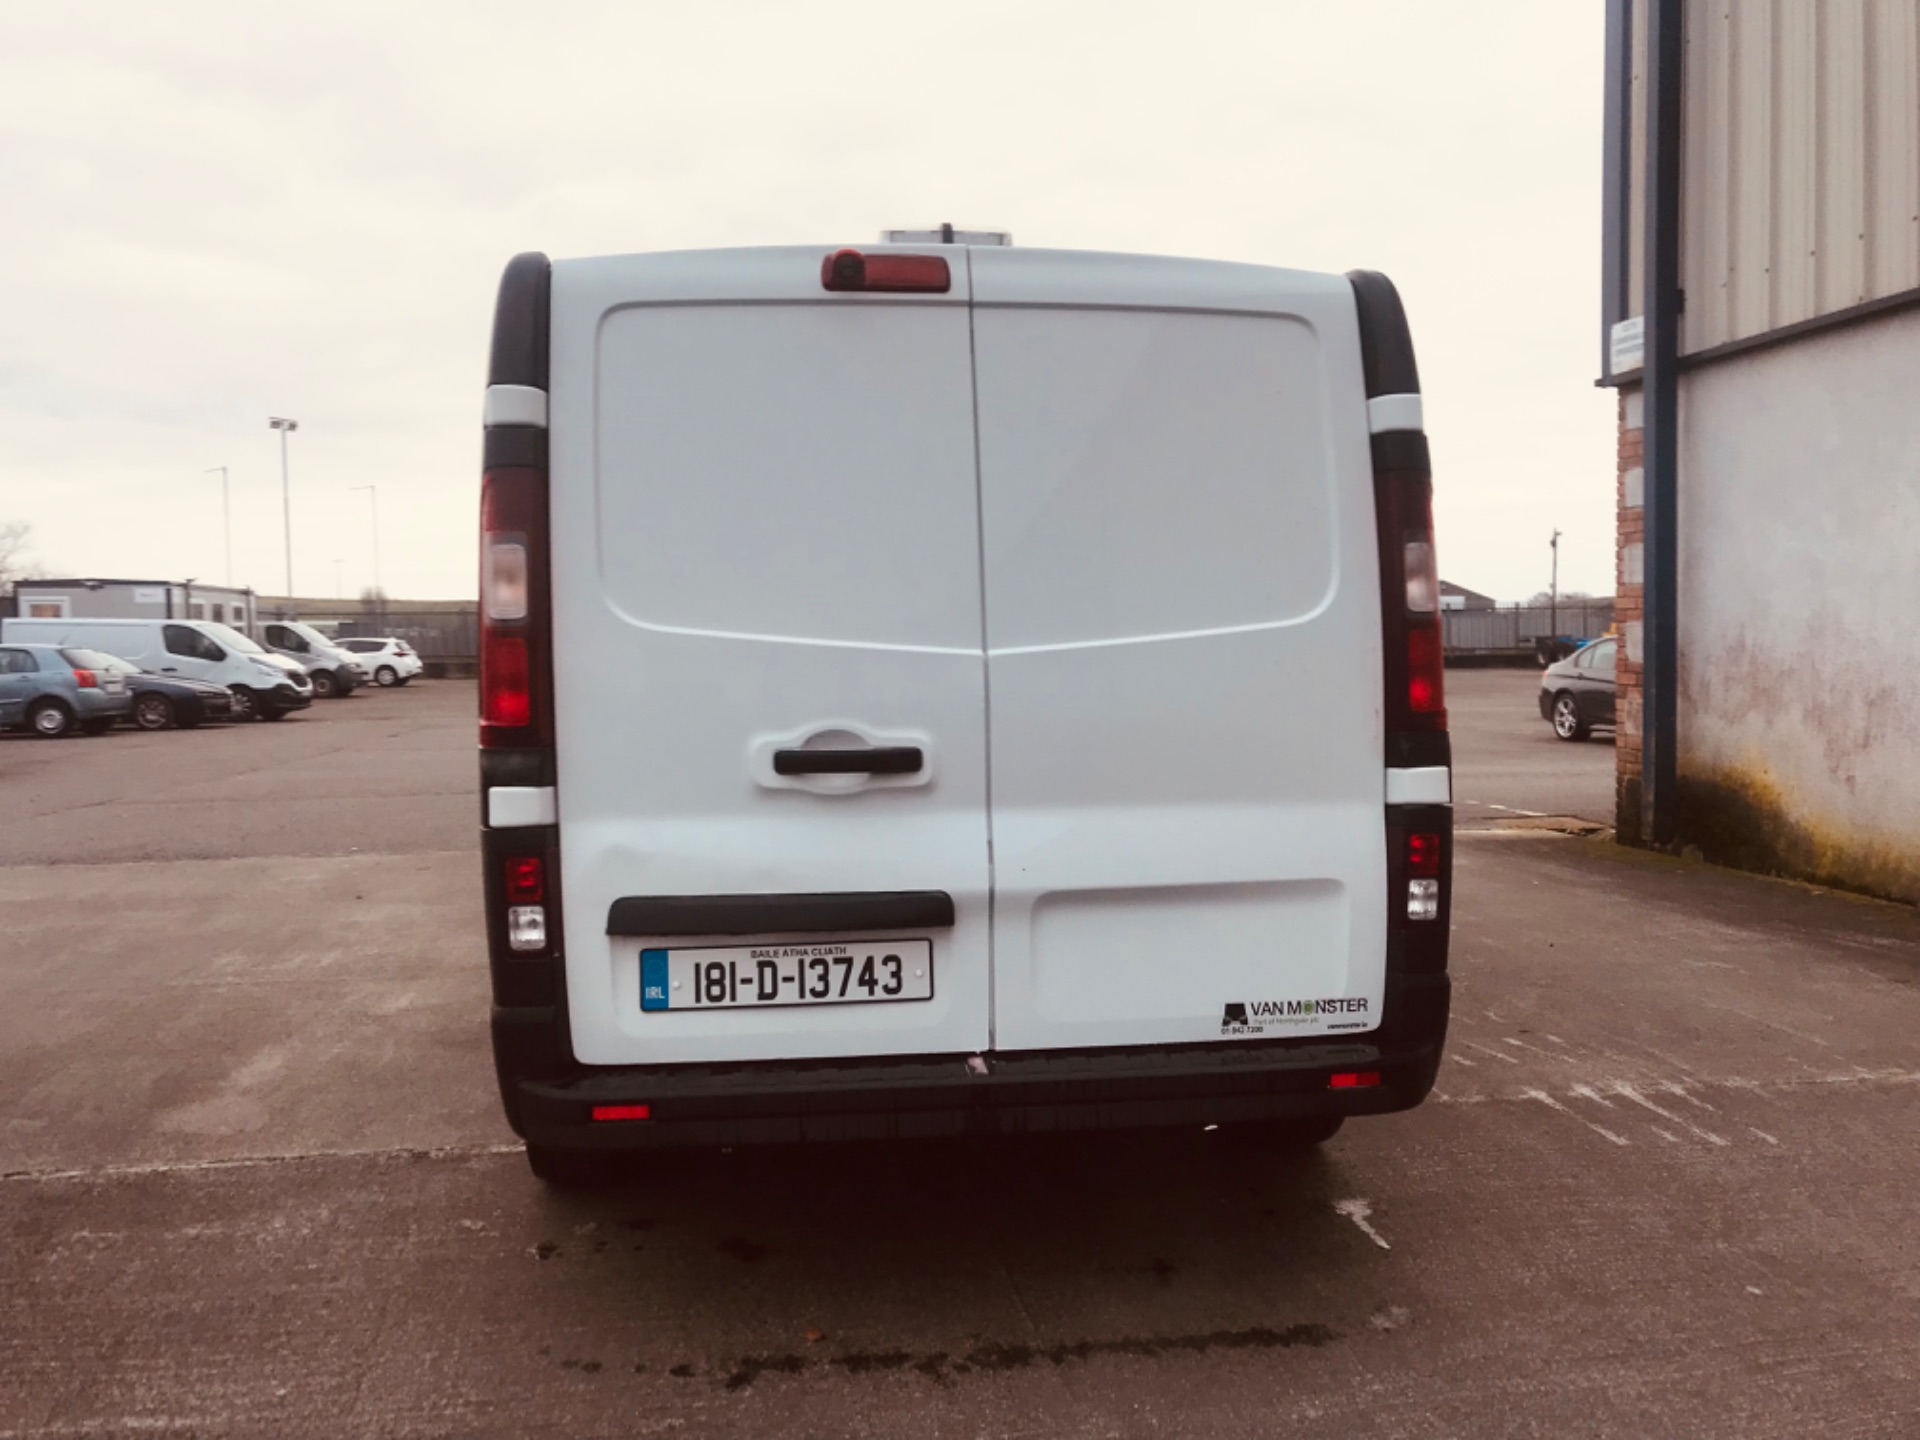 2018 Renault Trafic LL29 DCI 120 Business 3DR (181D13743) Thumbnail 6